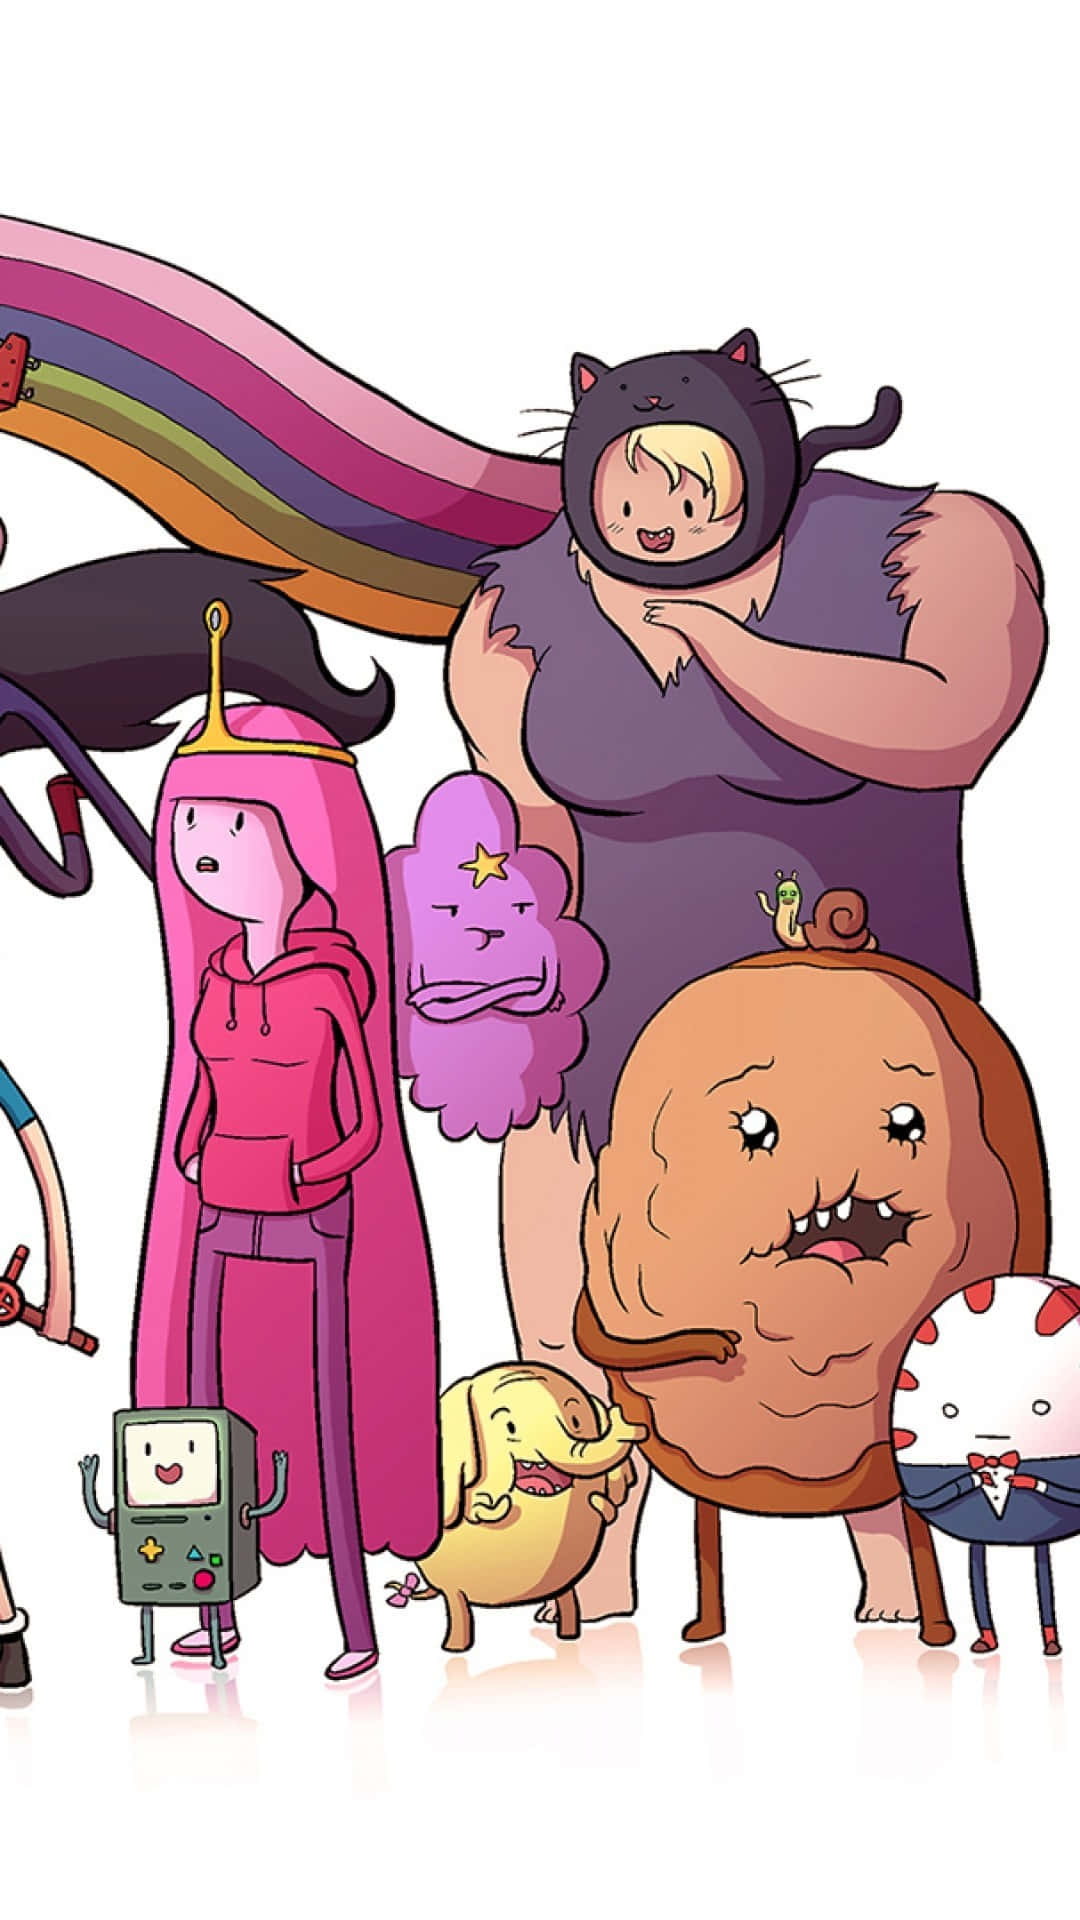 Play Adventure Time on your iPhone Wallpaper